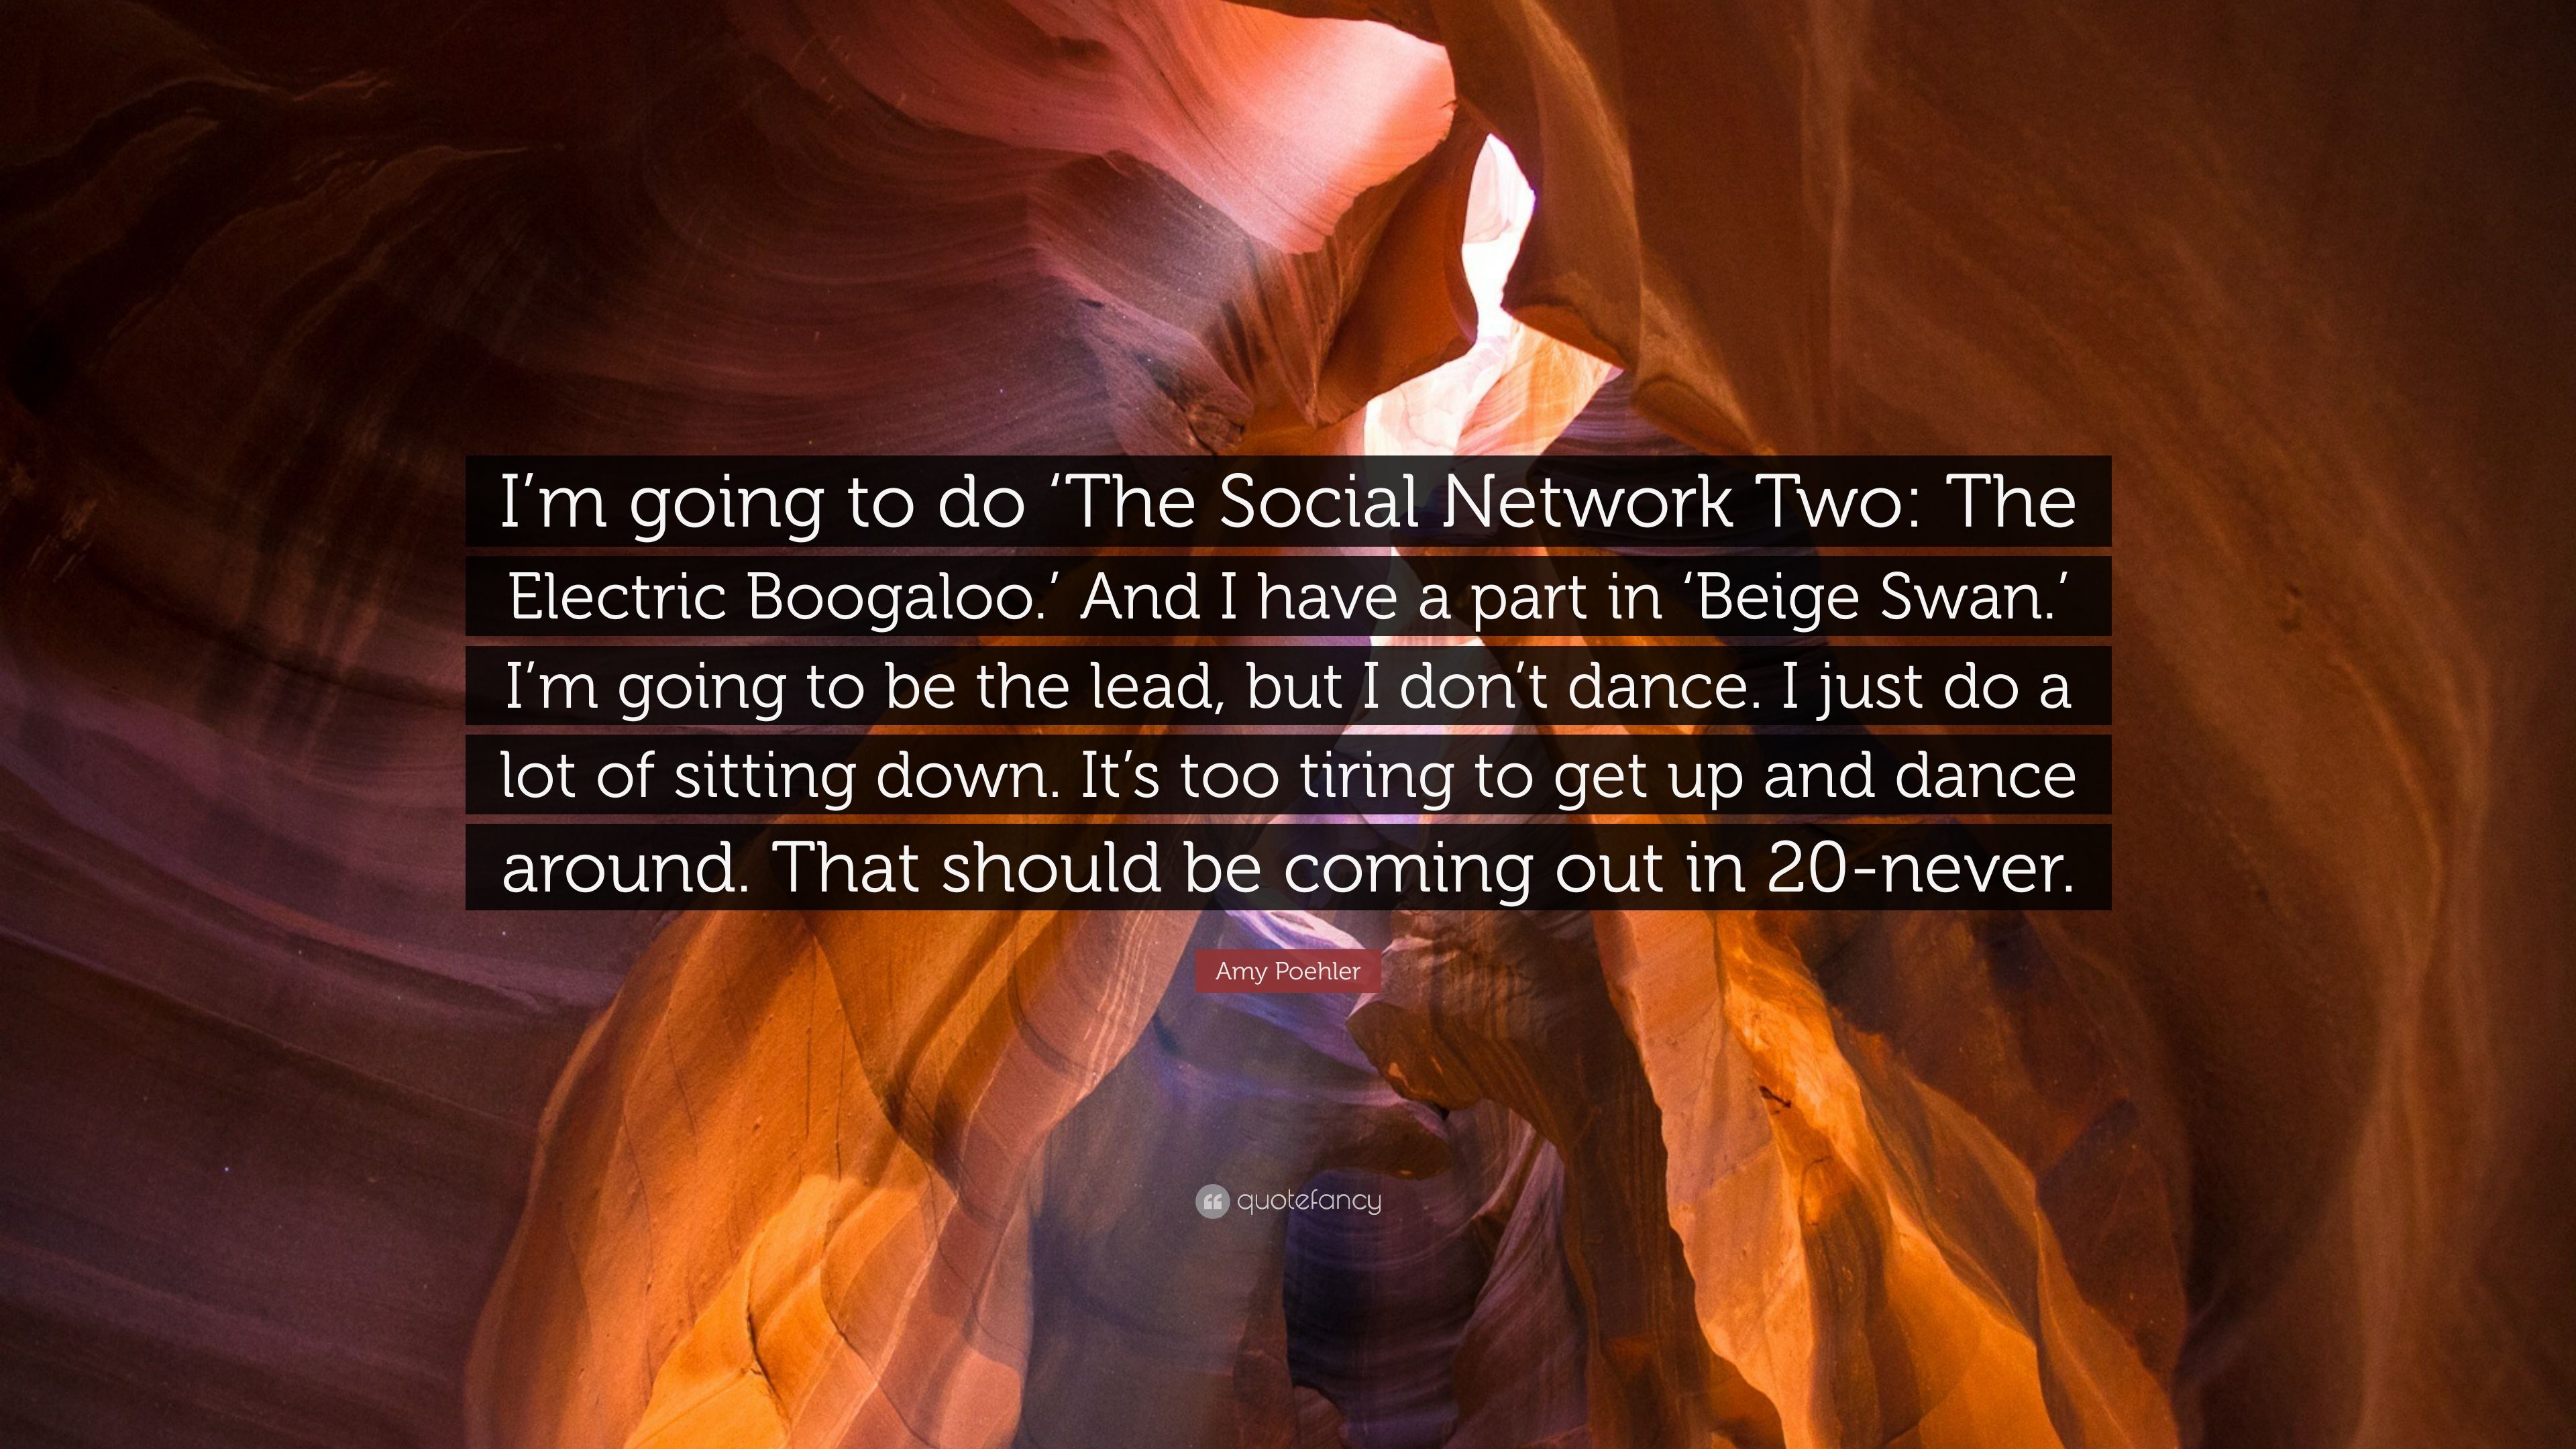 Amy Poehler Quote: “I'm going to do 'The Social Network Two